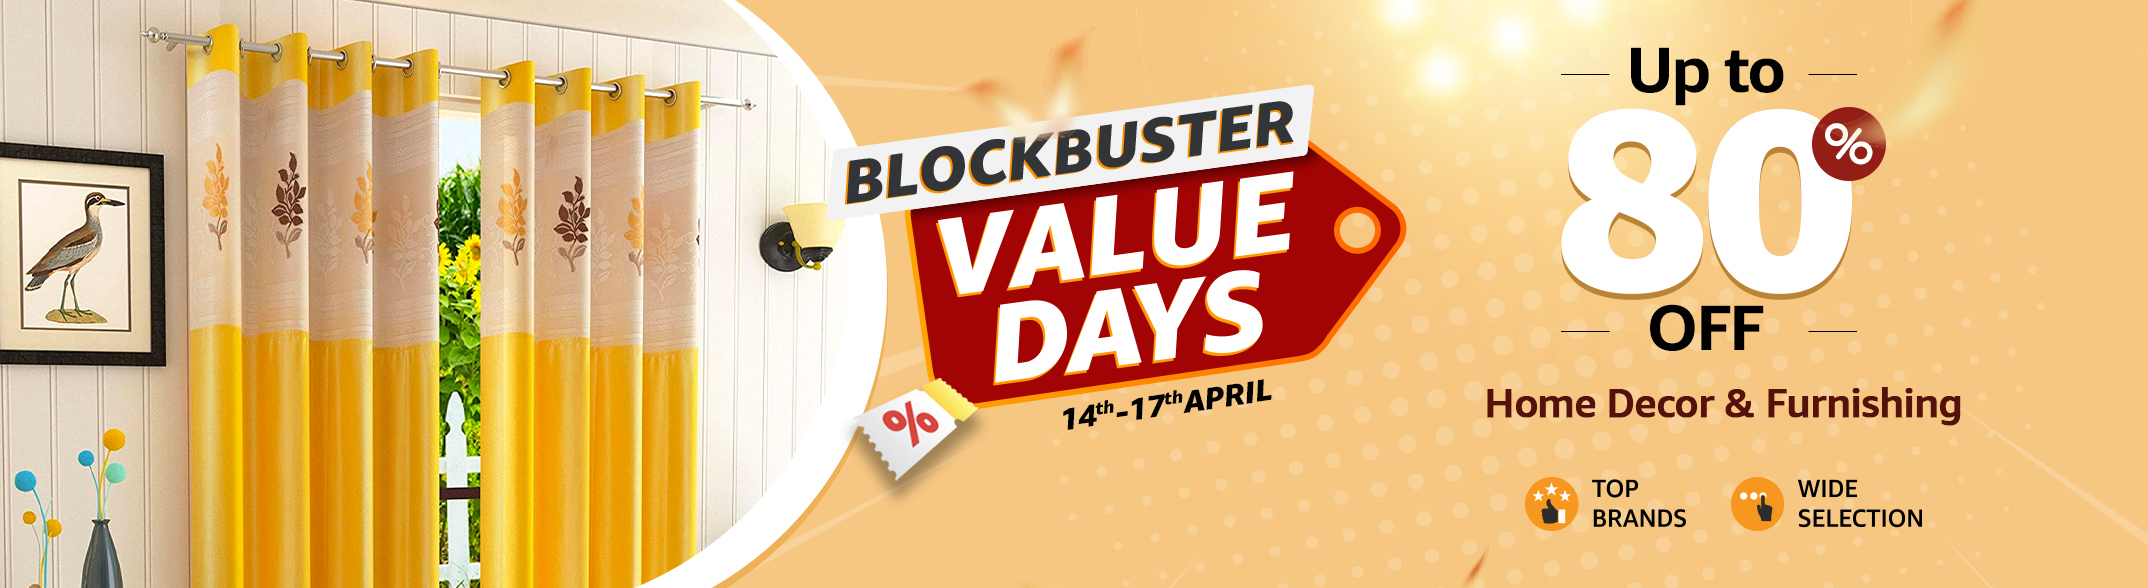 block buster value days